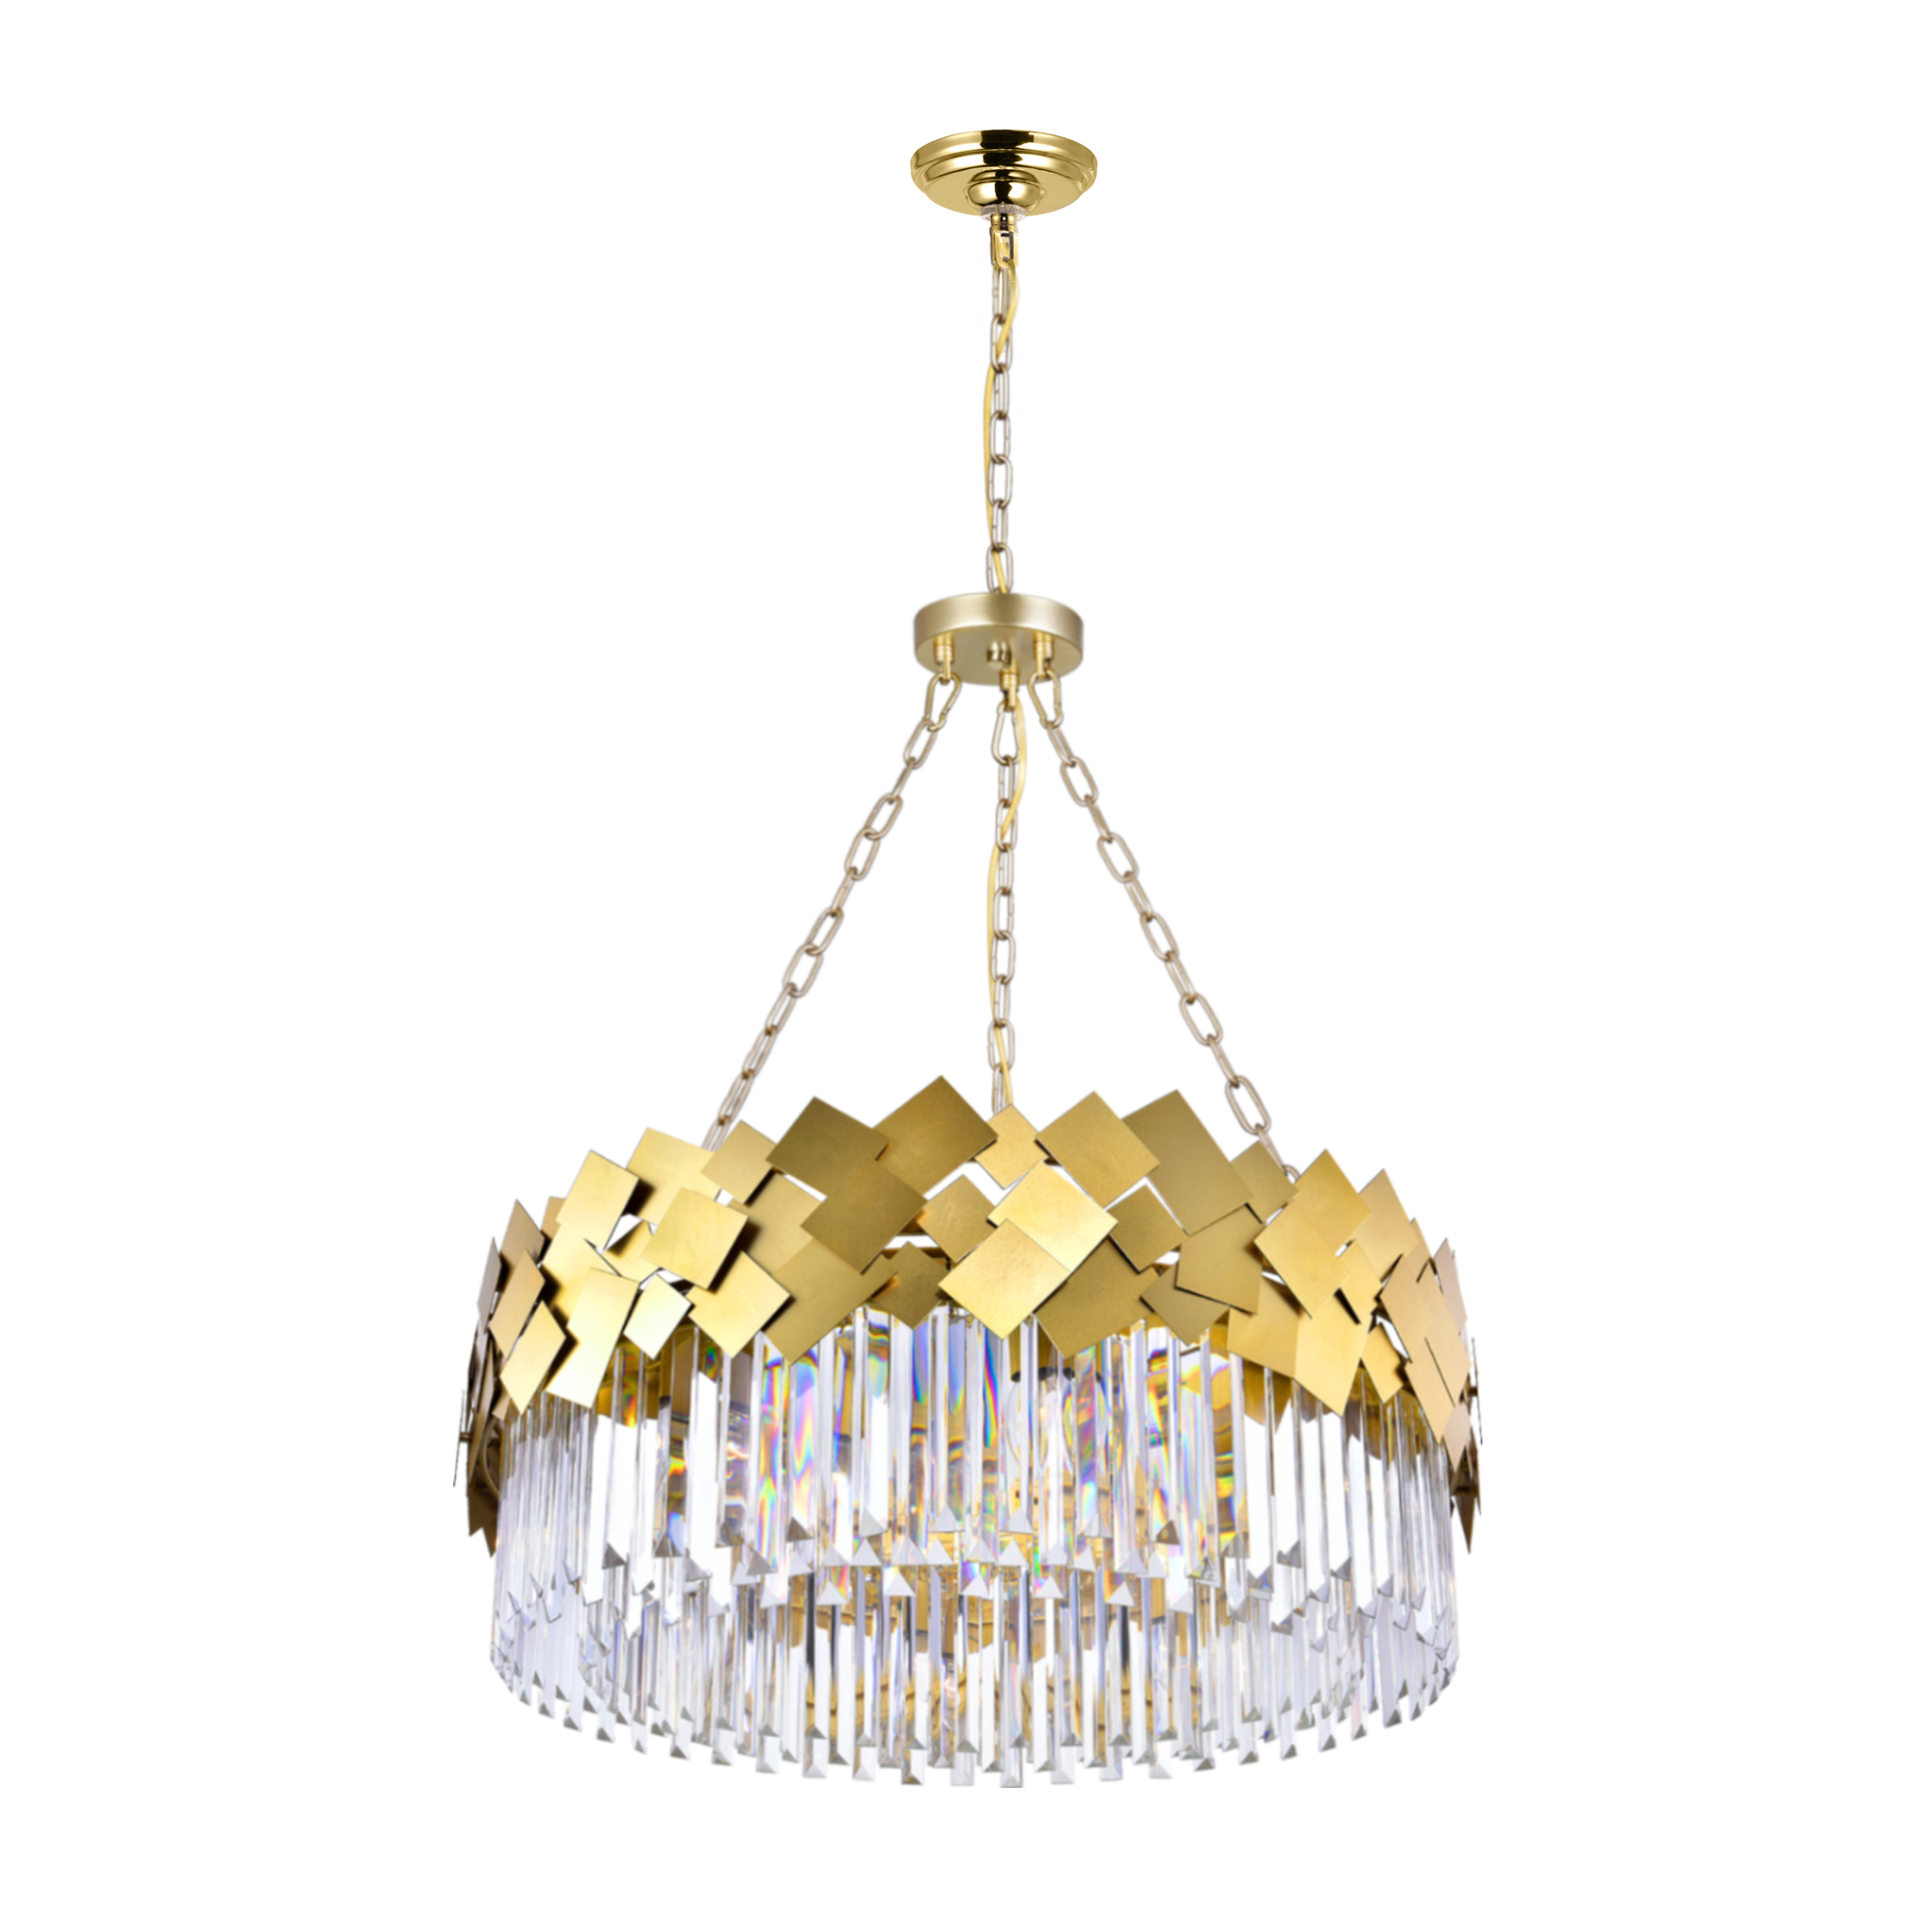 Panache 8 Light Down Chandelier With Medallion Gold Finish